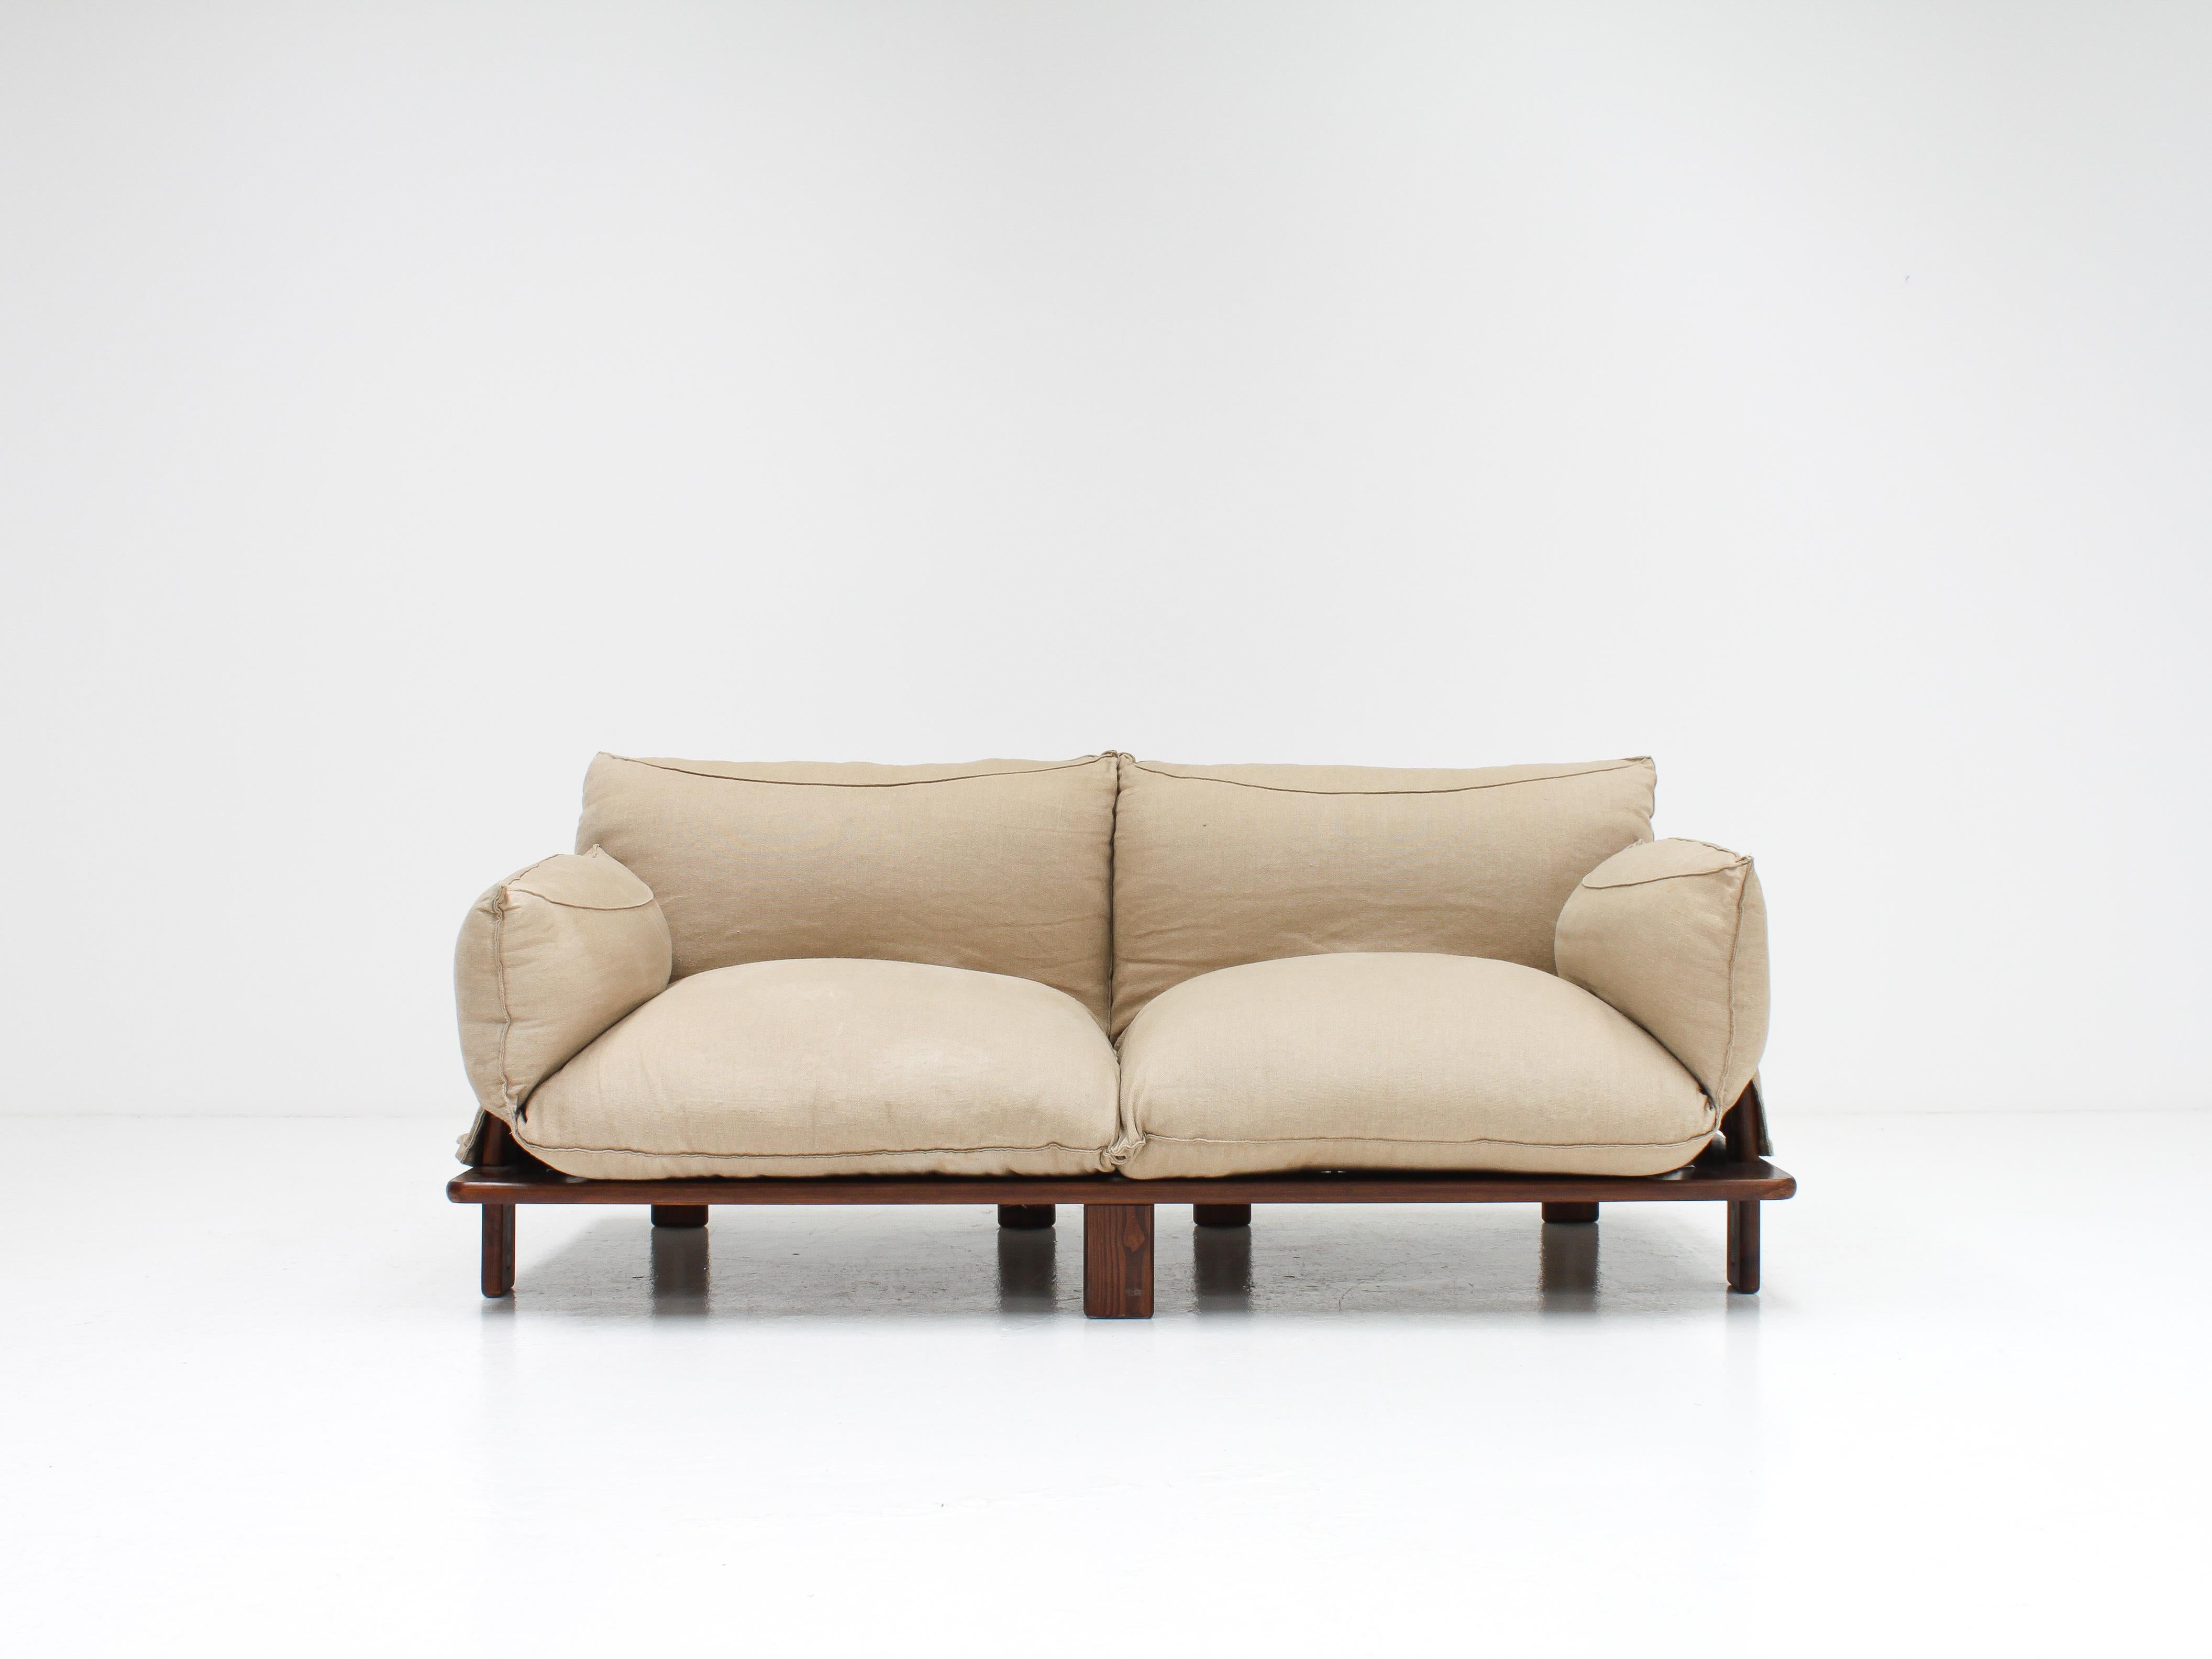 A beautiful and highly comfortable 2-seater sofa in original jute upholstery with a walnut base and manufactured by Saporiti, with the manufacturer's label in place.

We have attributed this sofa to Carlo Barloti because the design characteristics